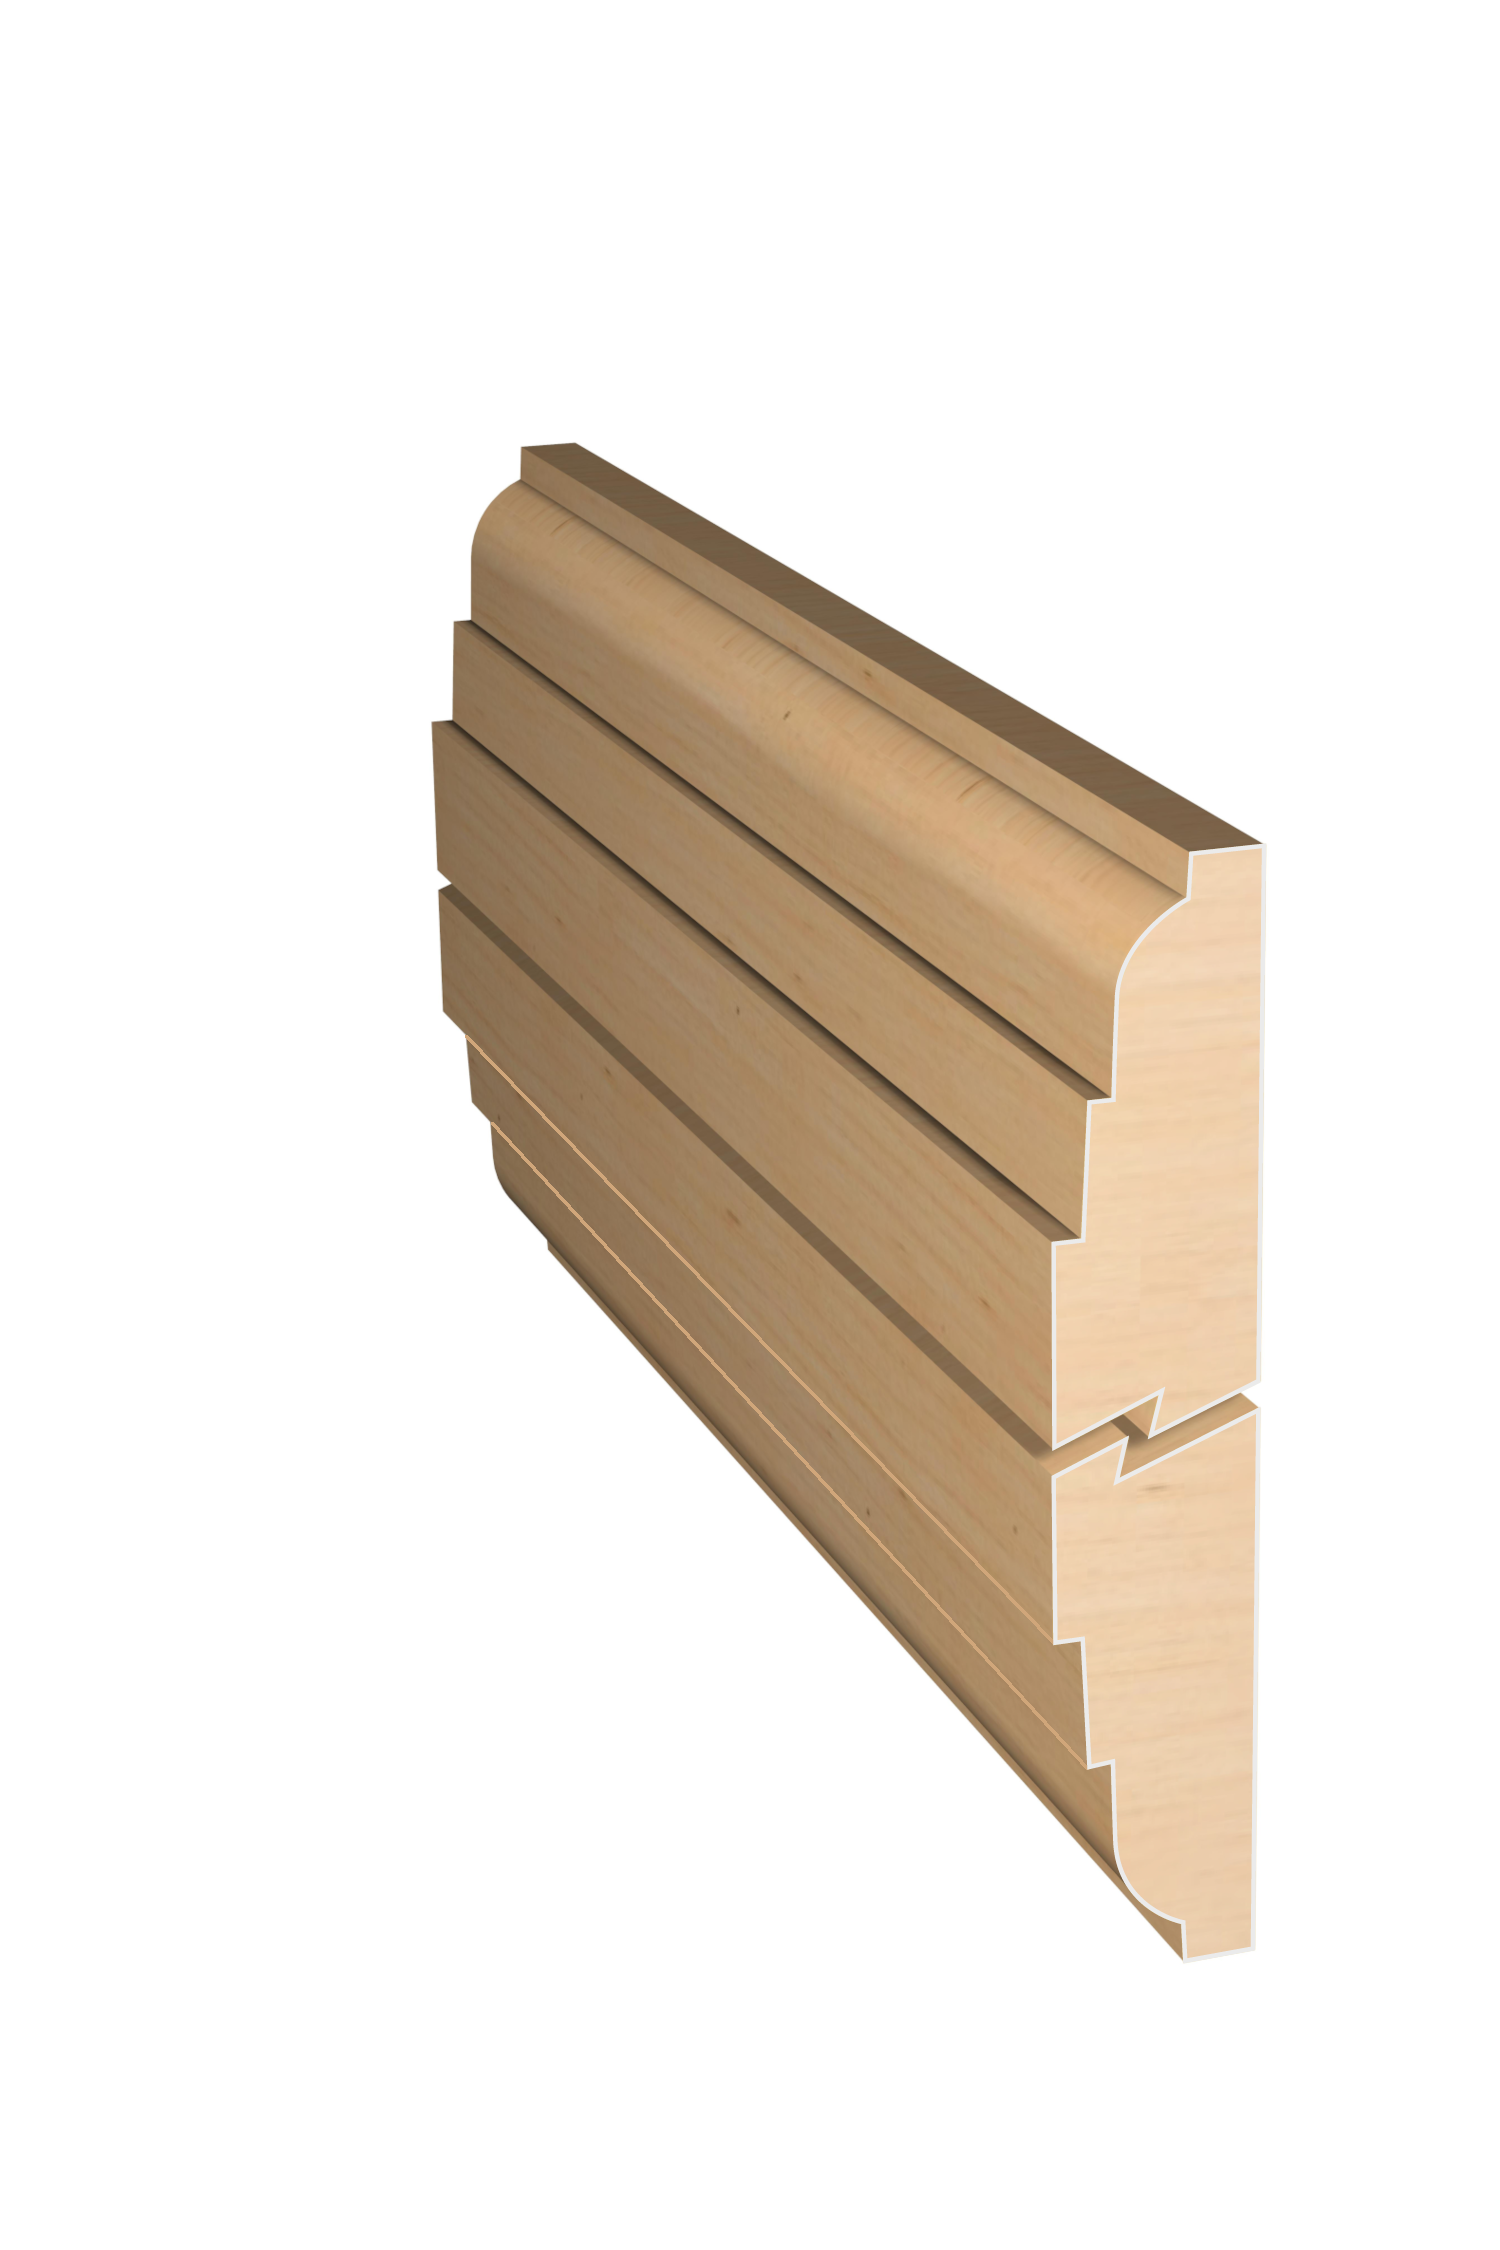 Three dimensional rendering of custom edge profile wood molding SKPL18 made by Public Lumber Company in Detroit.